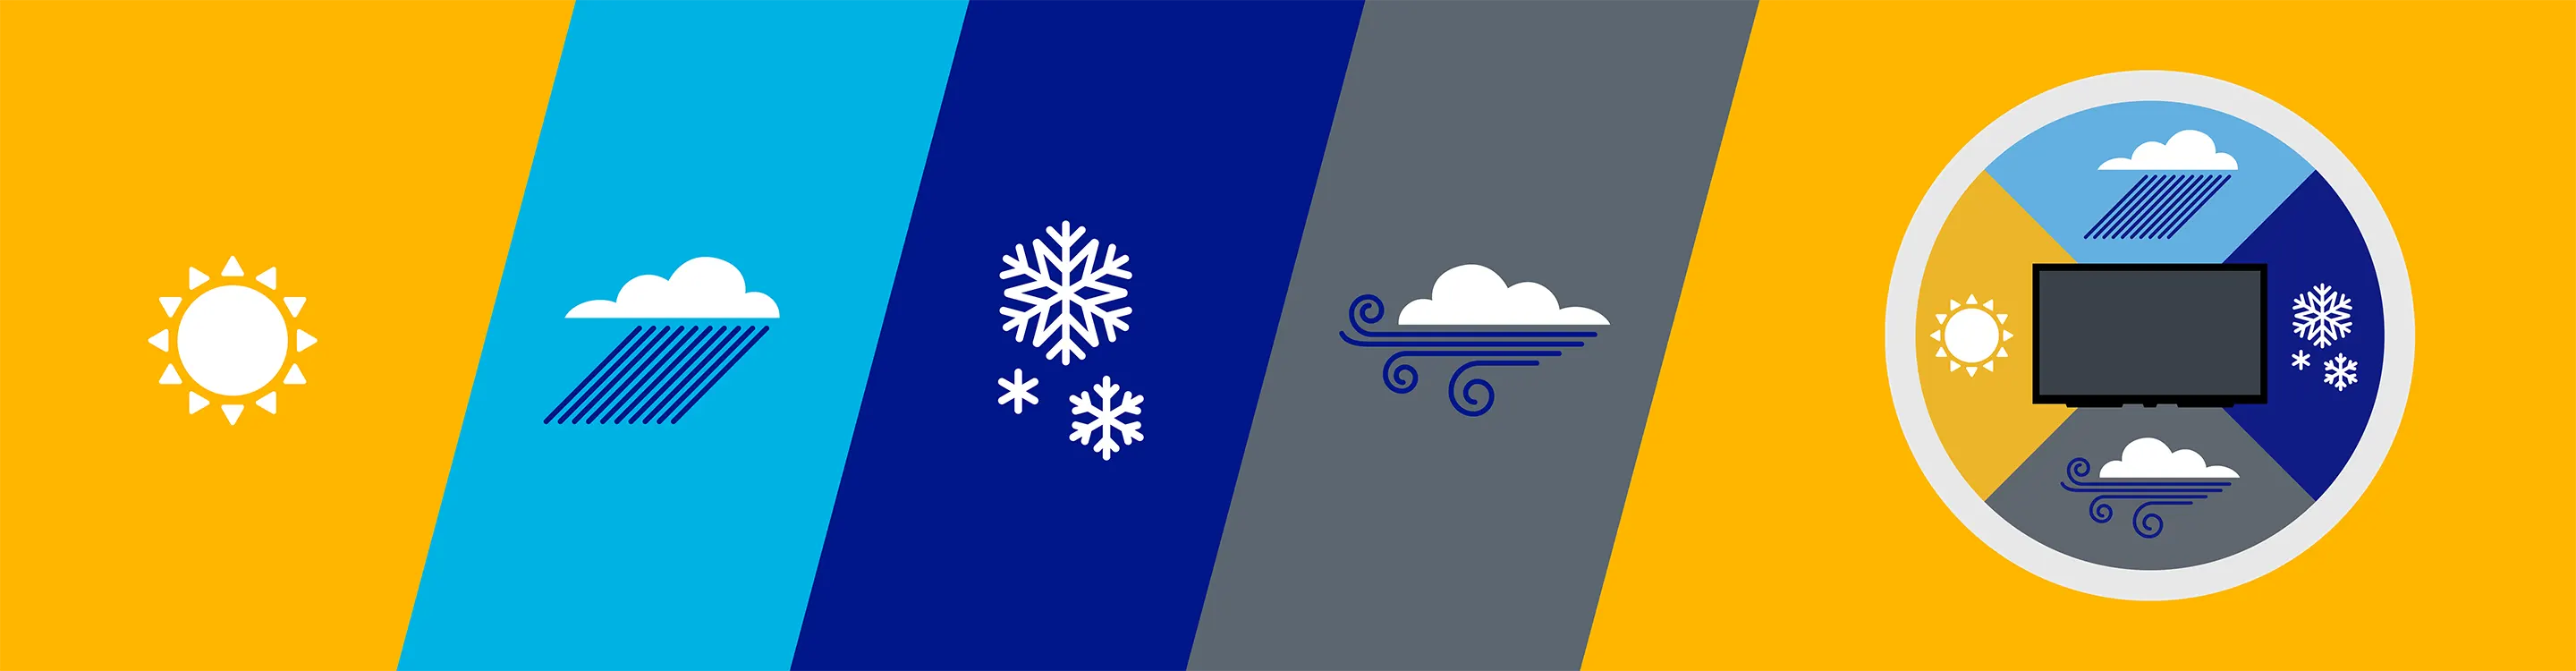 Banner showing weather elements